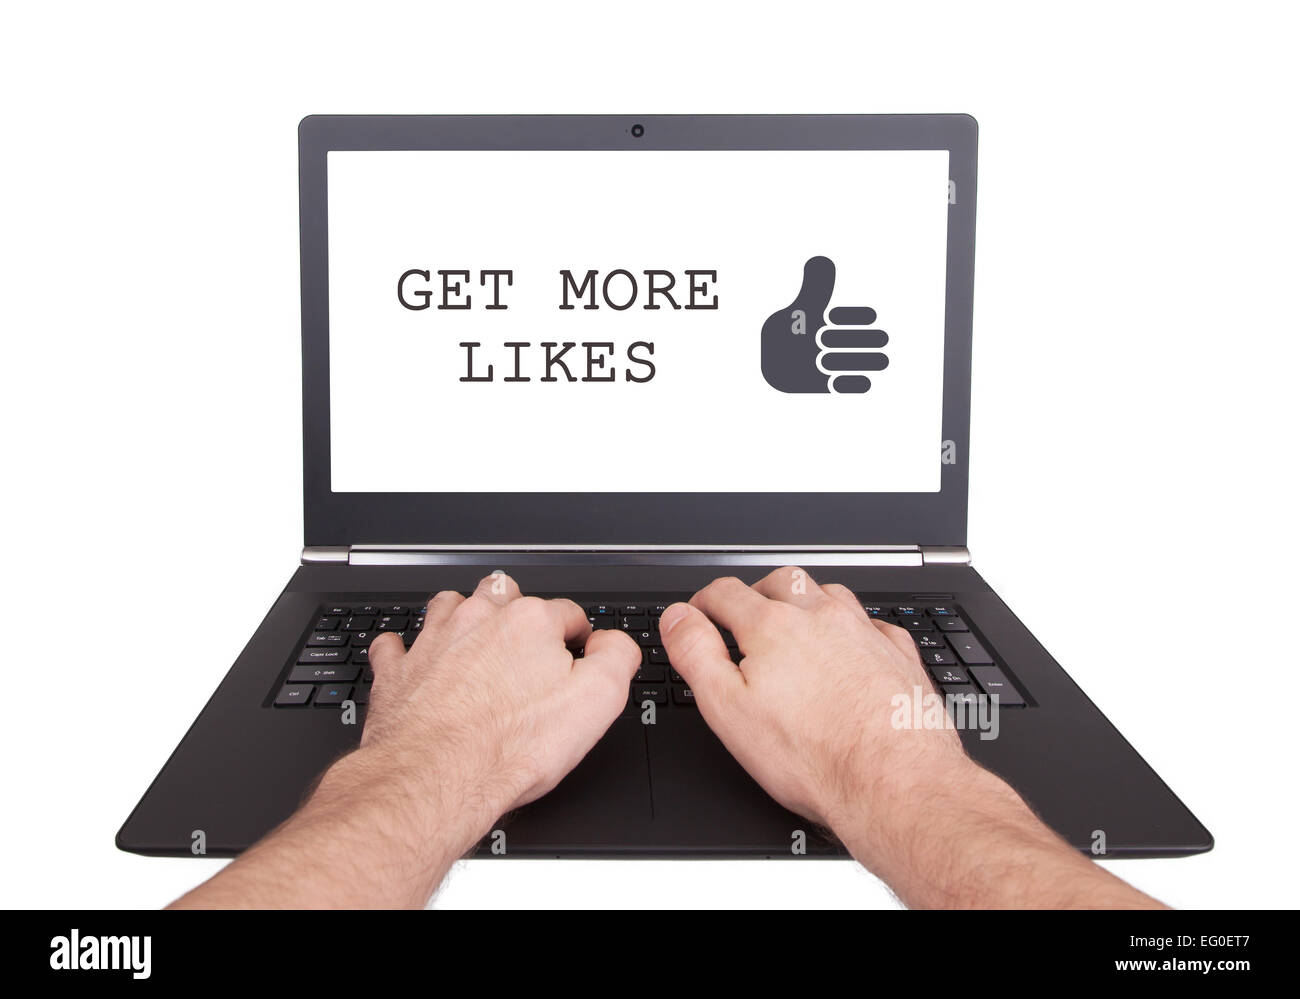 Man working on laptop, get more likes, isolated Stock Photo